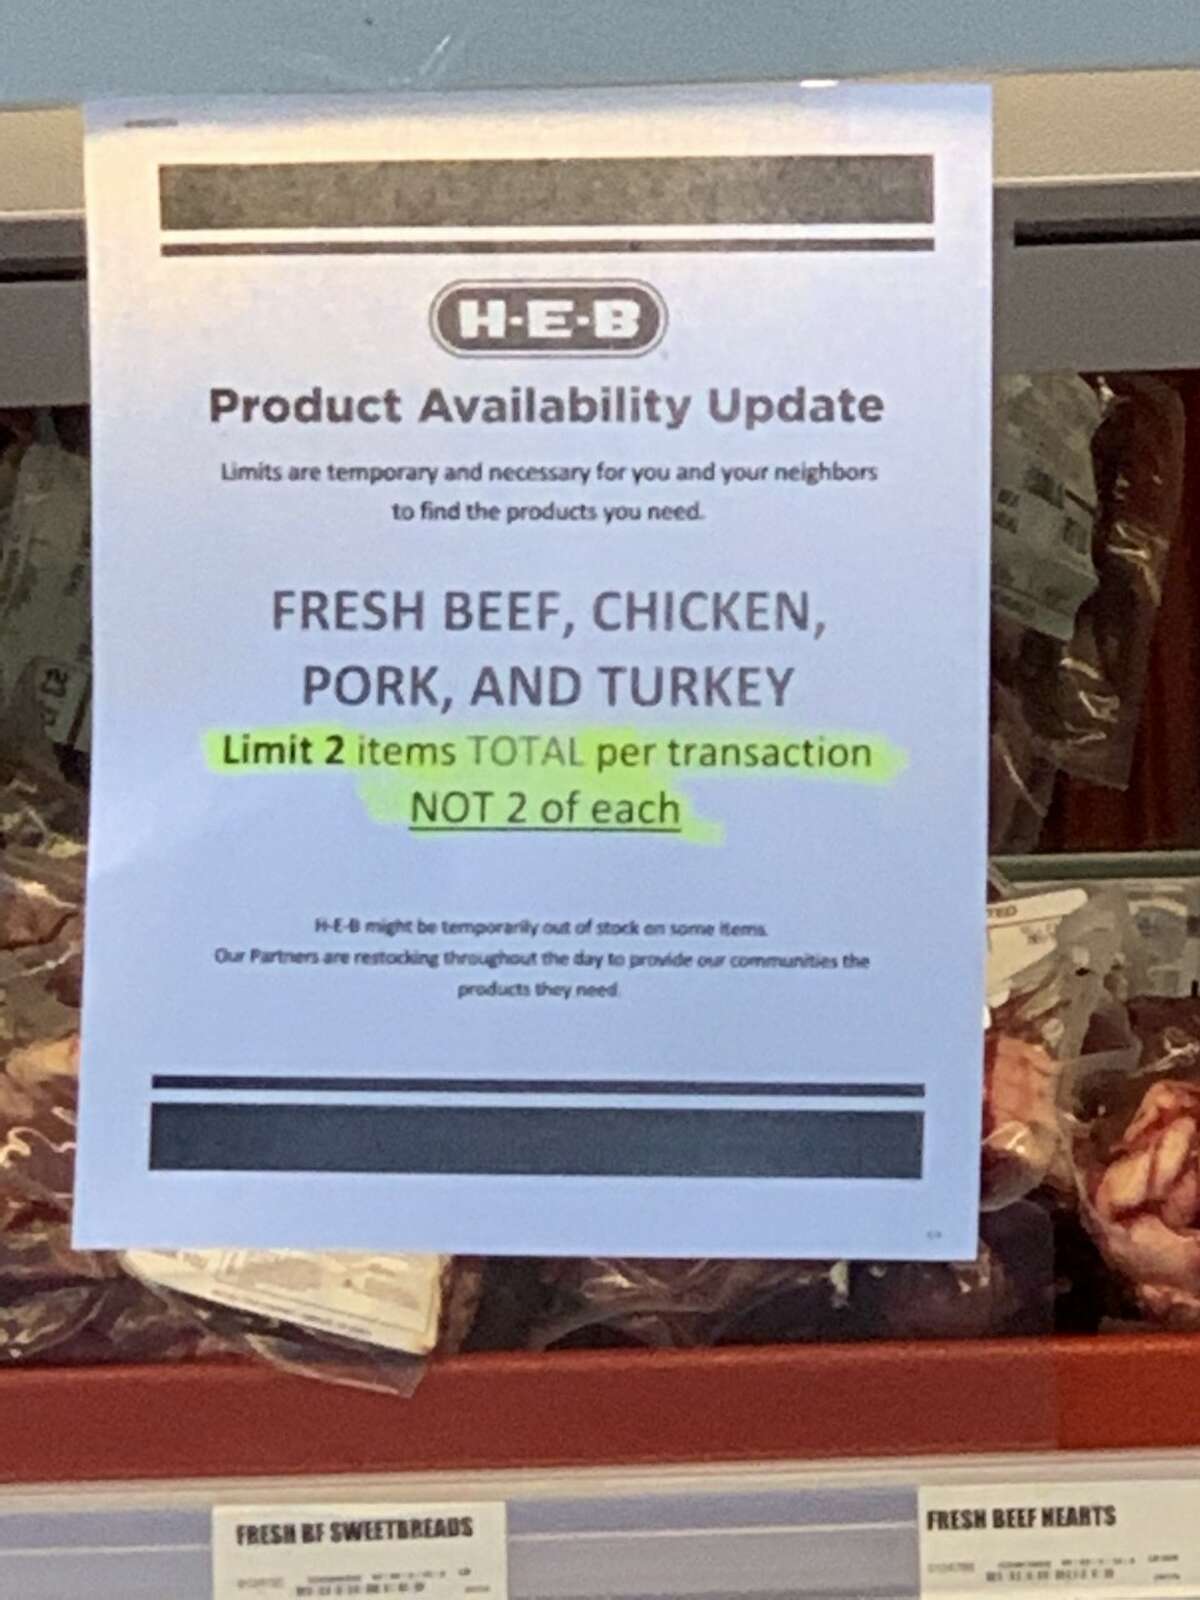 The grocery store maintains a list of purchase limits for food and non-food items on their company newsroom. On Thursday, the site was updated to include new limits on ground beef and chicken, beef, pork and turkey. Customers in San Antonio are limited to one package of ground beef and two packages total (not each) of chicken, beef, pork or turkey. The limit applies to stores in Central Texas, the Gulf Coast, the border region, and certain West and North Texas towns, the site says.